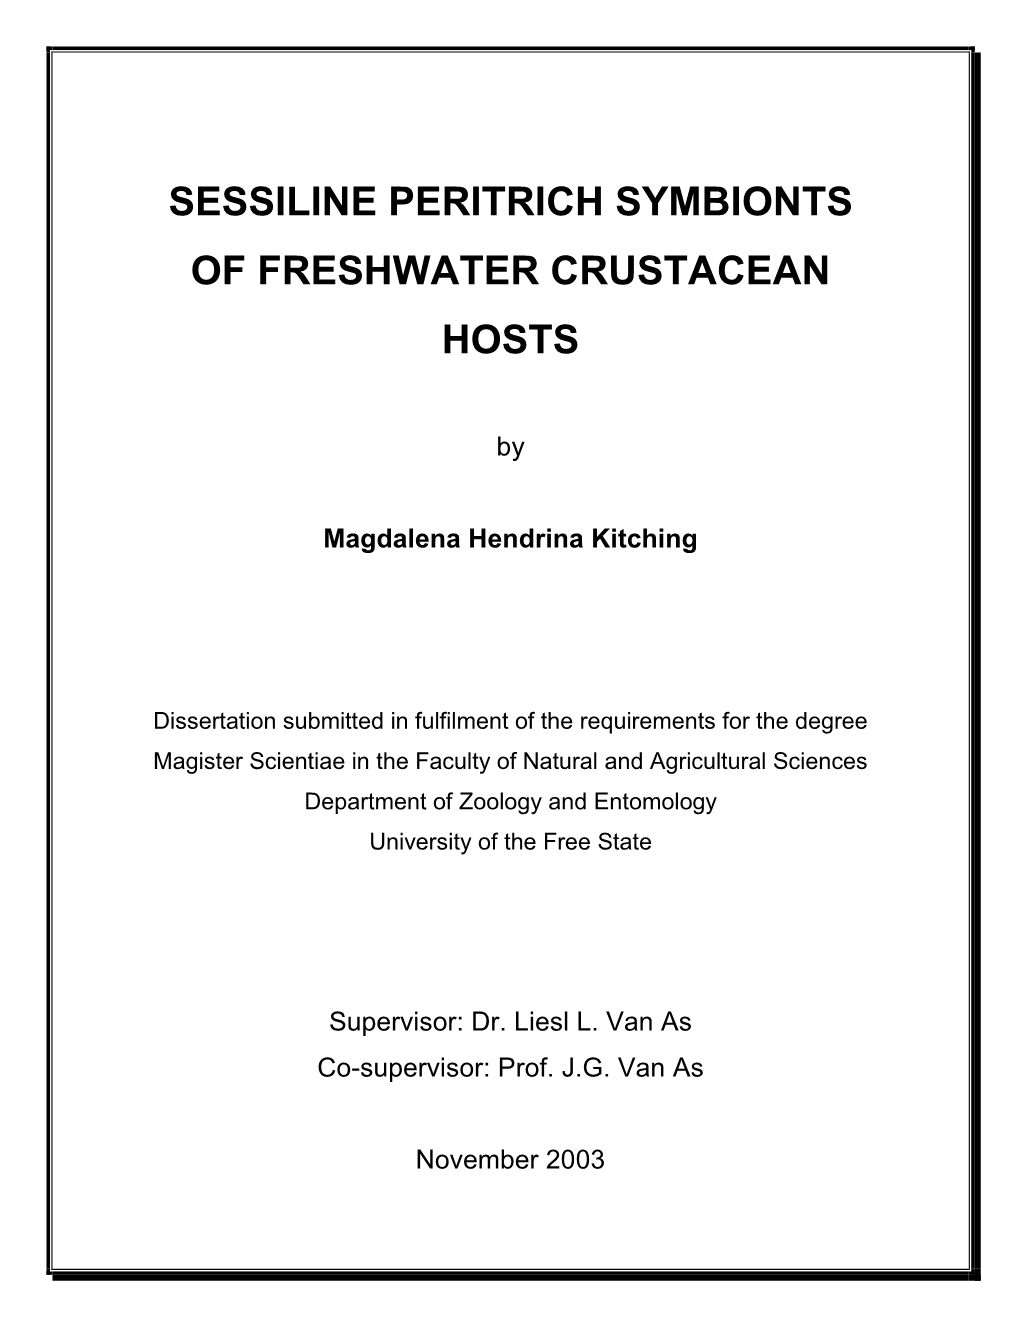 Sessiline Peritrich Symbionts of Freshwater Crustacean Hosts